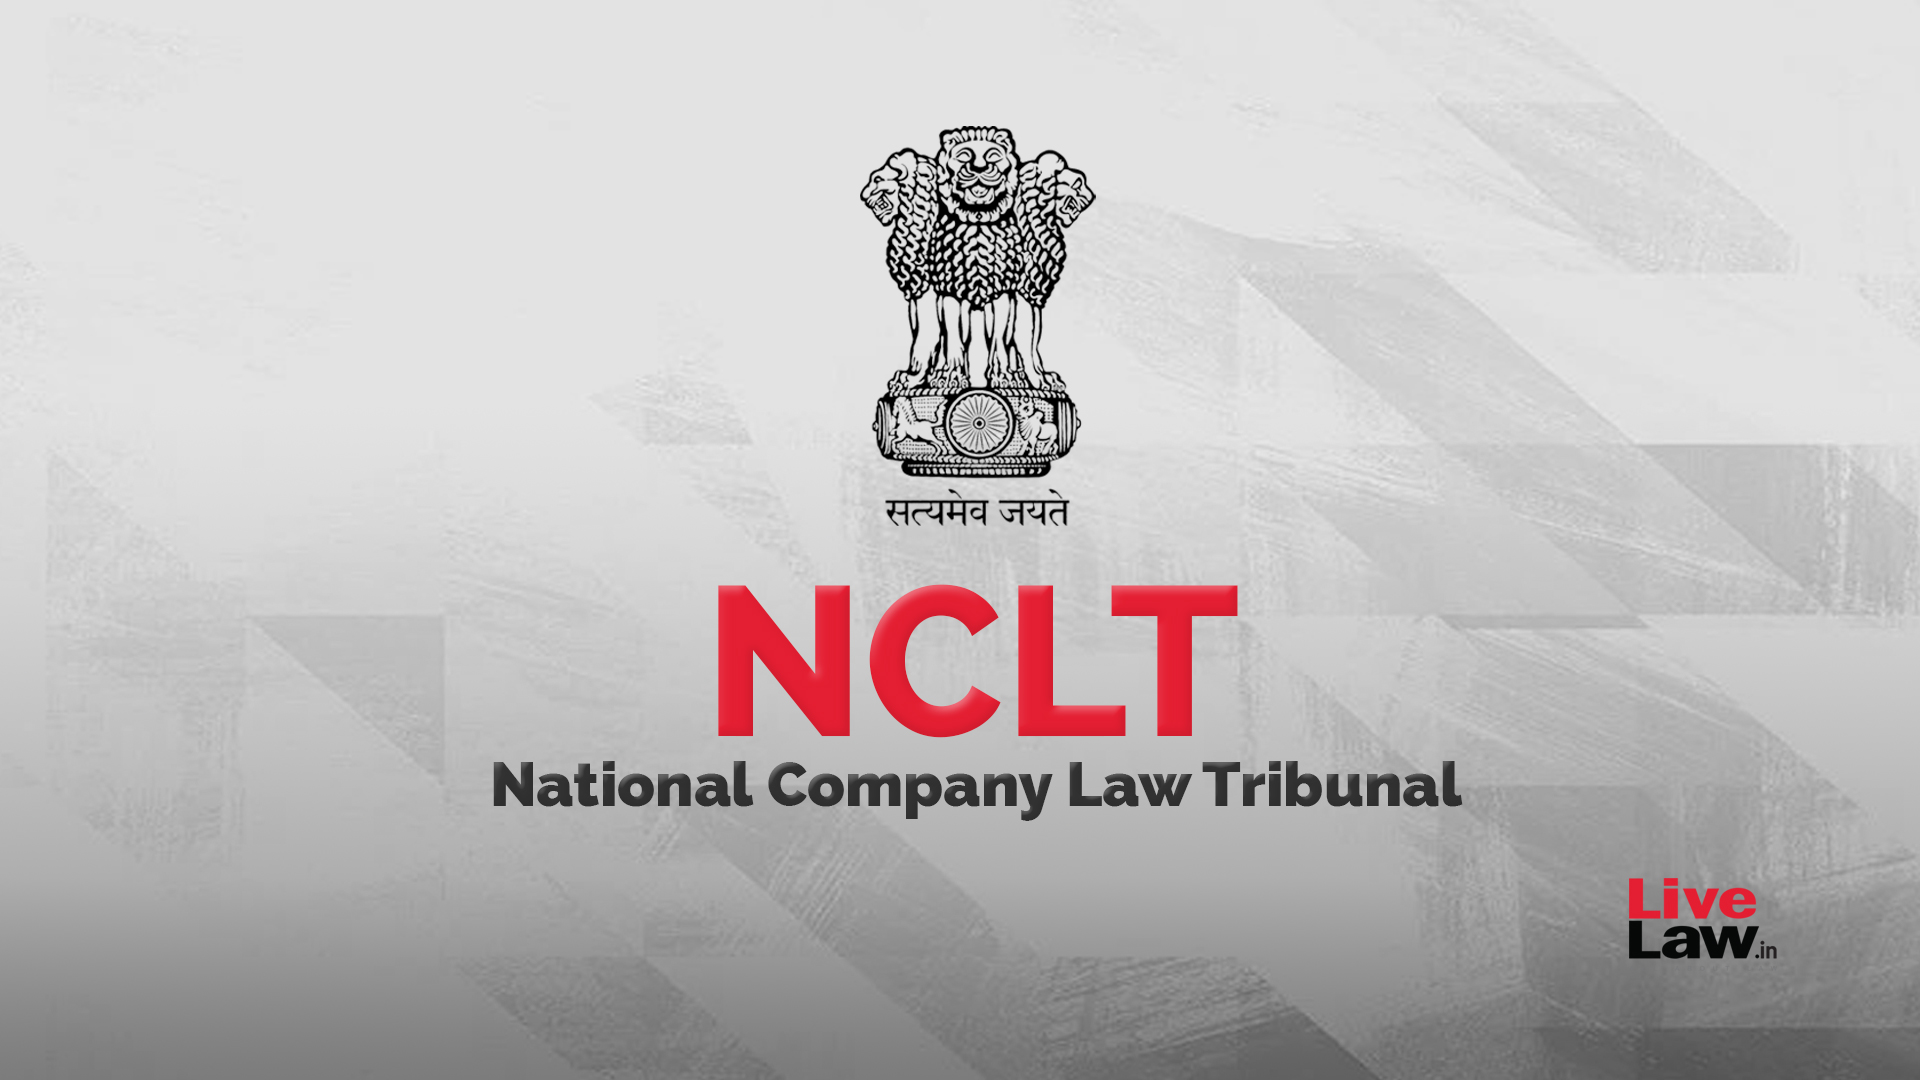 CIRP Cannot Be Initiated Solely For Interest Amount, If The Principal Amount Is Discharged: NCLT Delhi